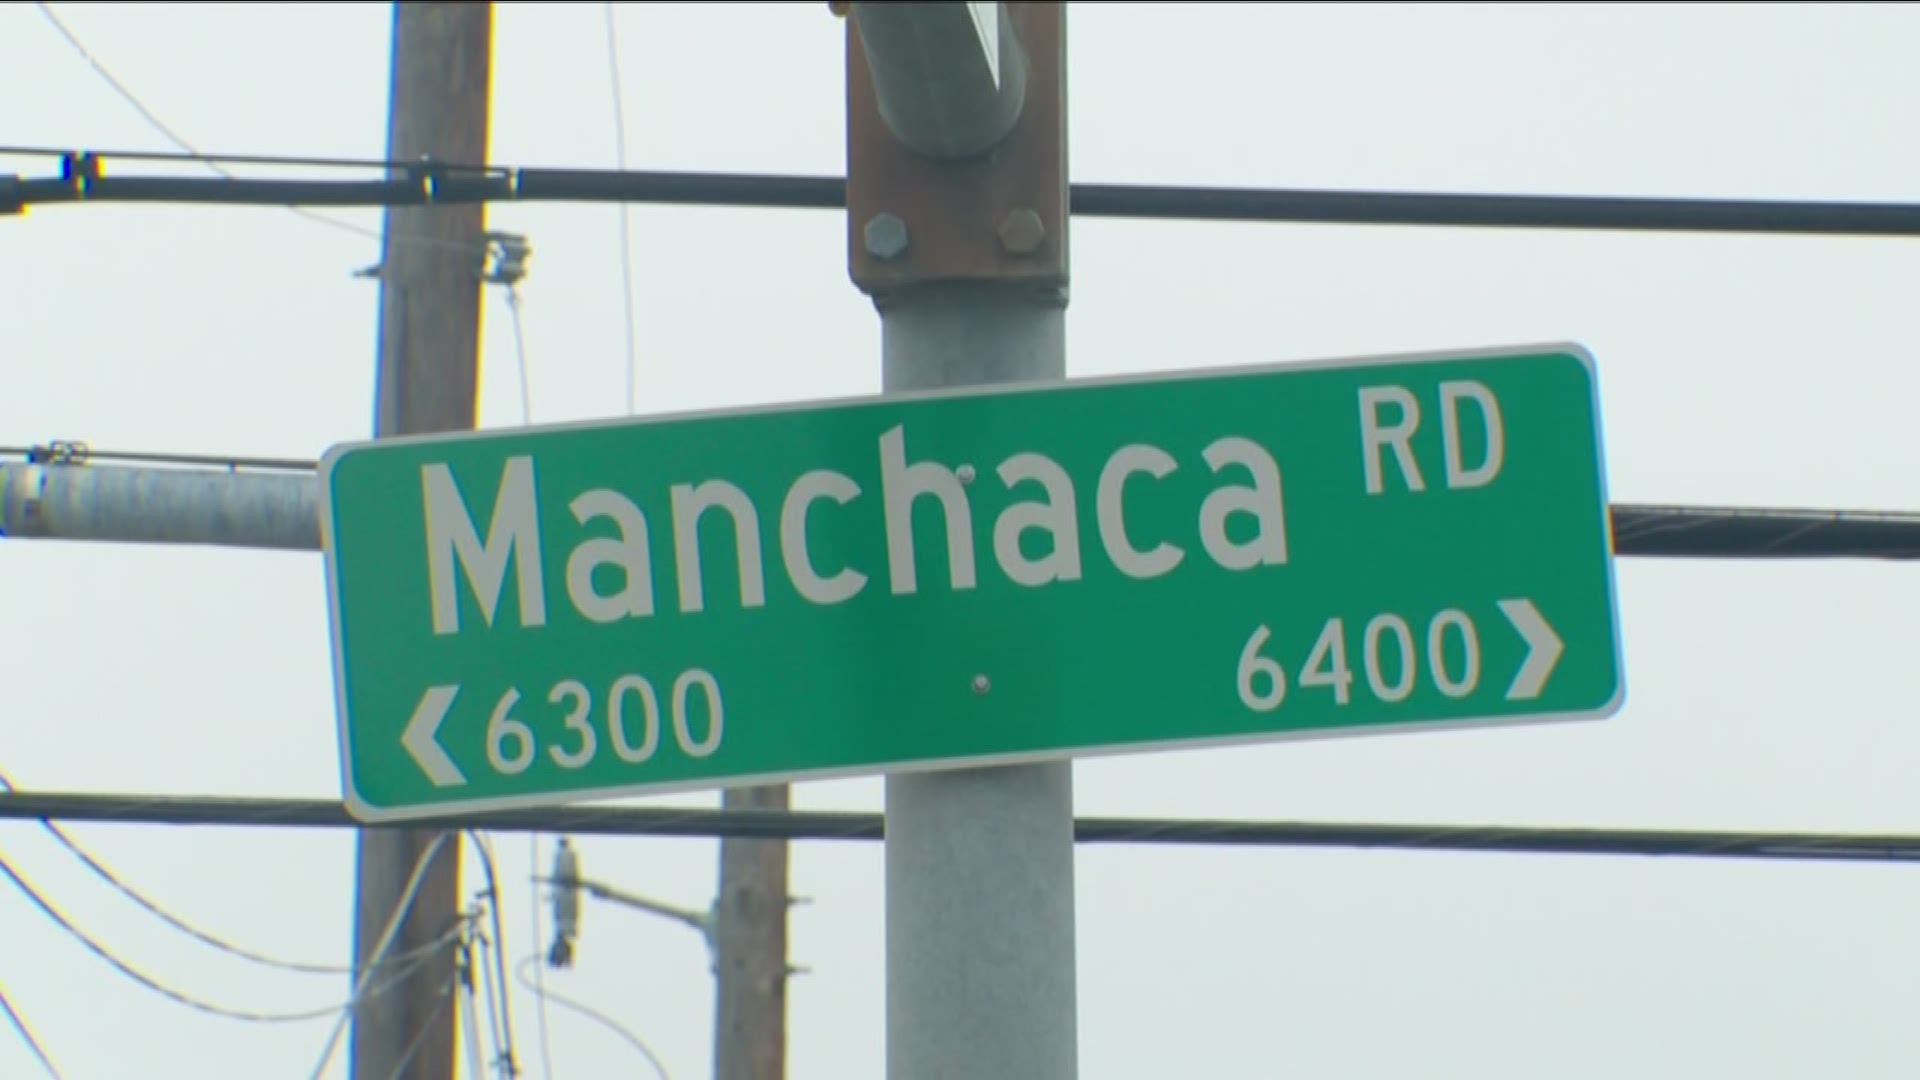 After months of debating, a long-standing South Austin road will get a new name.